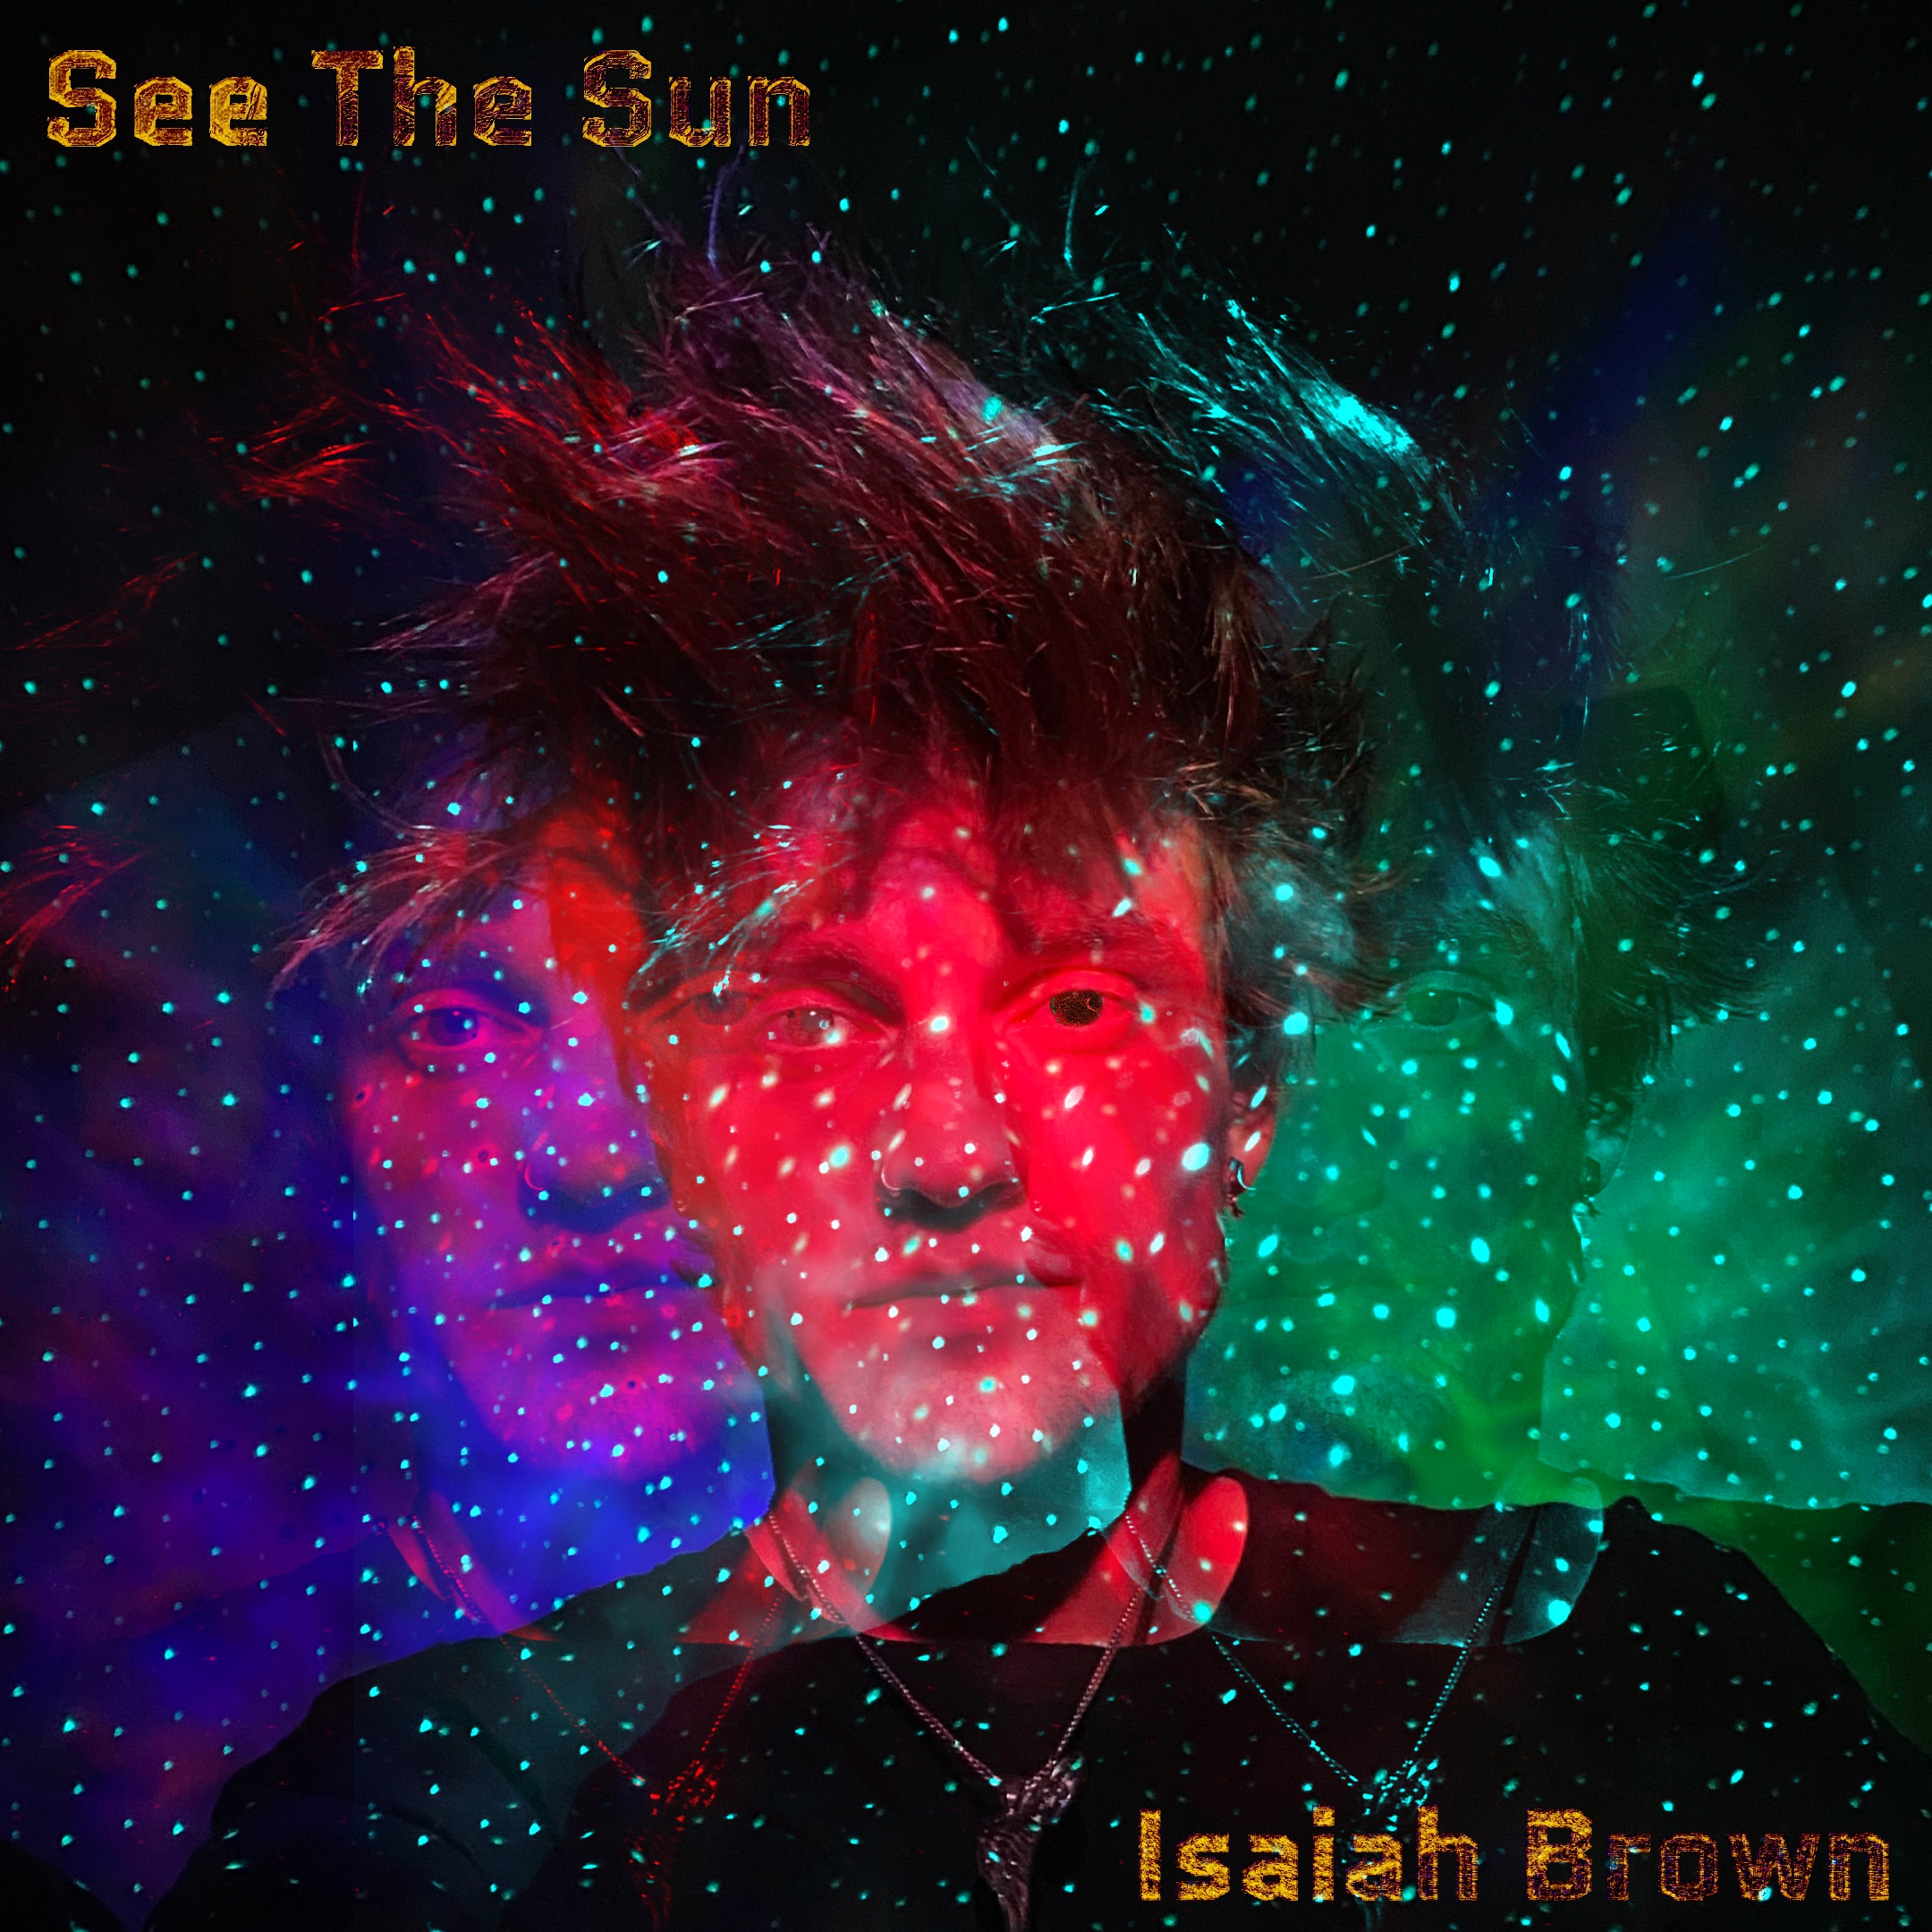 Creating Electric Fusions of Dance and New Age Pop - Rising Artist Isaiah Brown Enthrals in Latest Release ‘See The Sun’